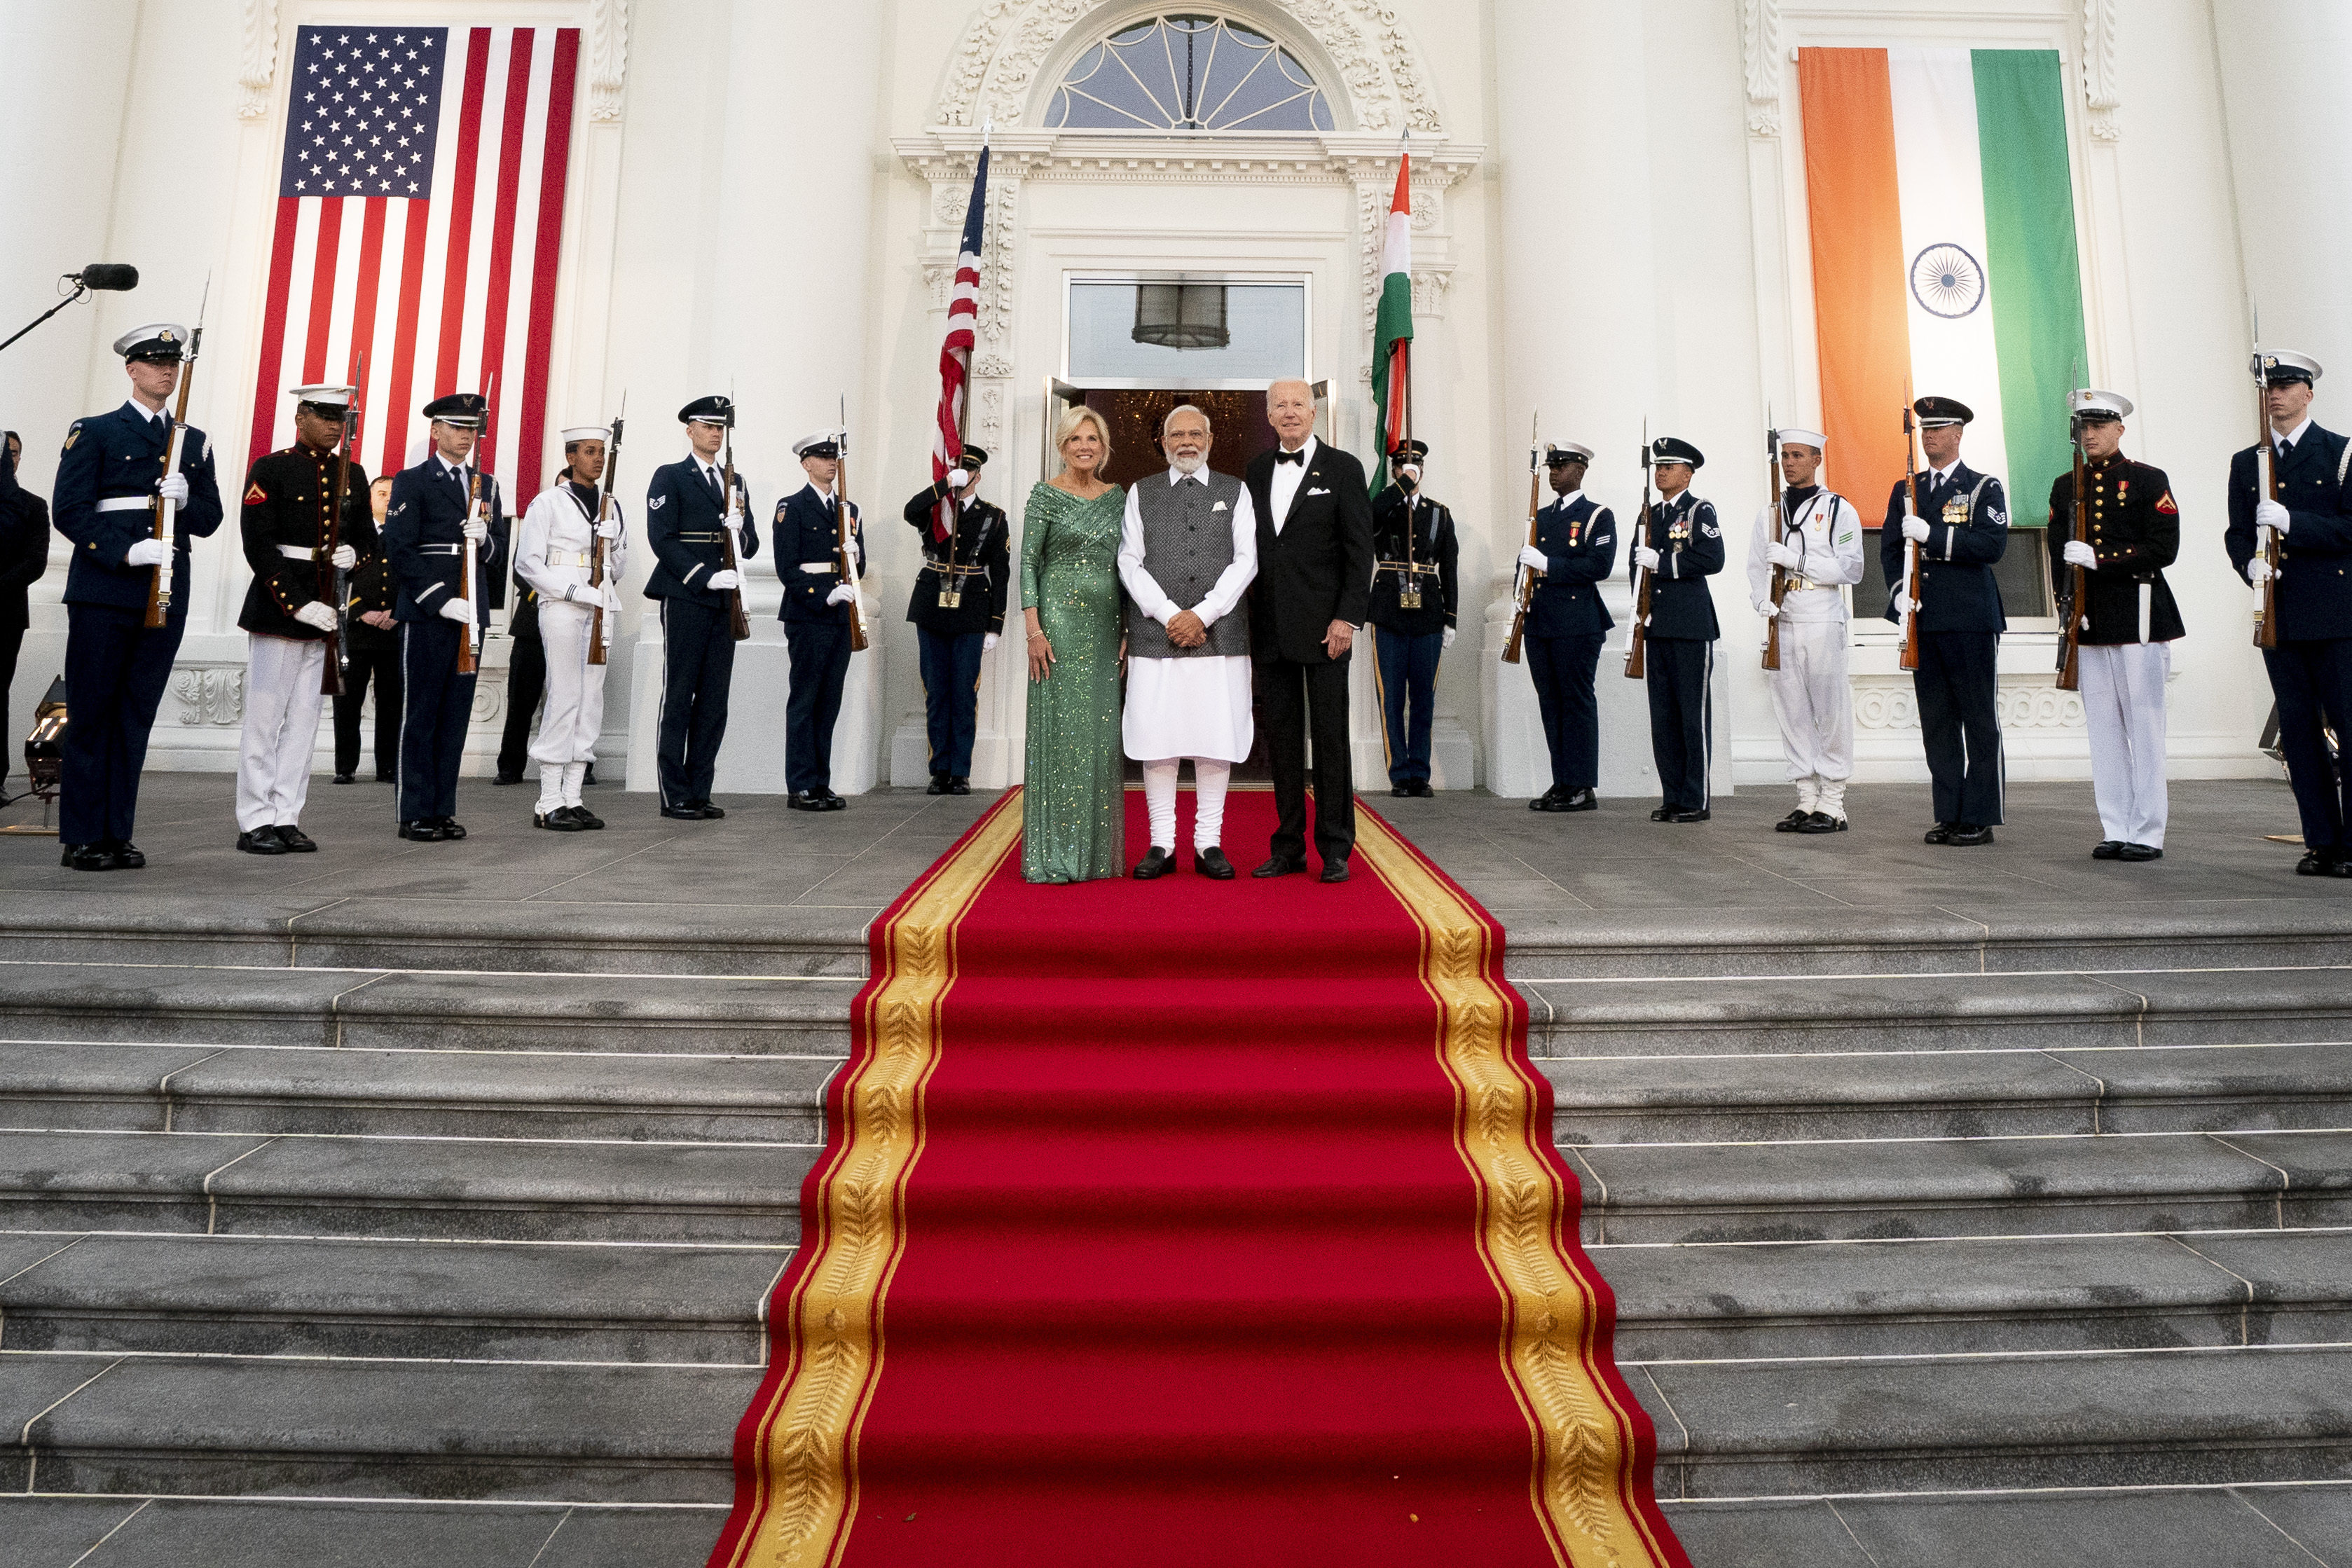 US President Joe Biden and first lady Jill Biden welcome India’s Prime Minister Narendra Modi on the red carpet as he arrives for a State Dinner on the North Portico of the White House in Washington on June 22. Photo: AP